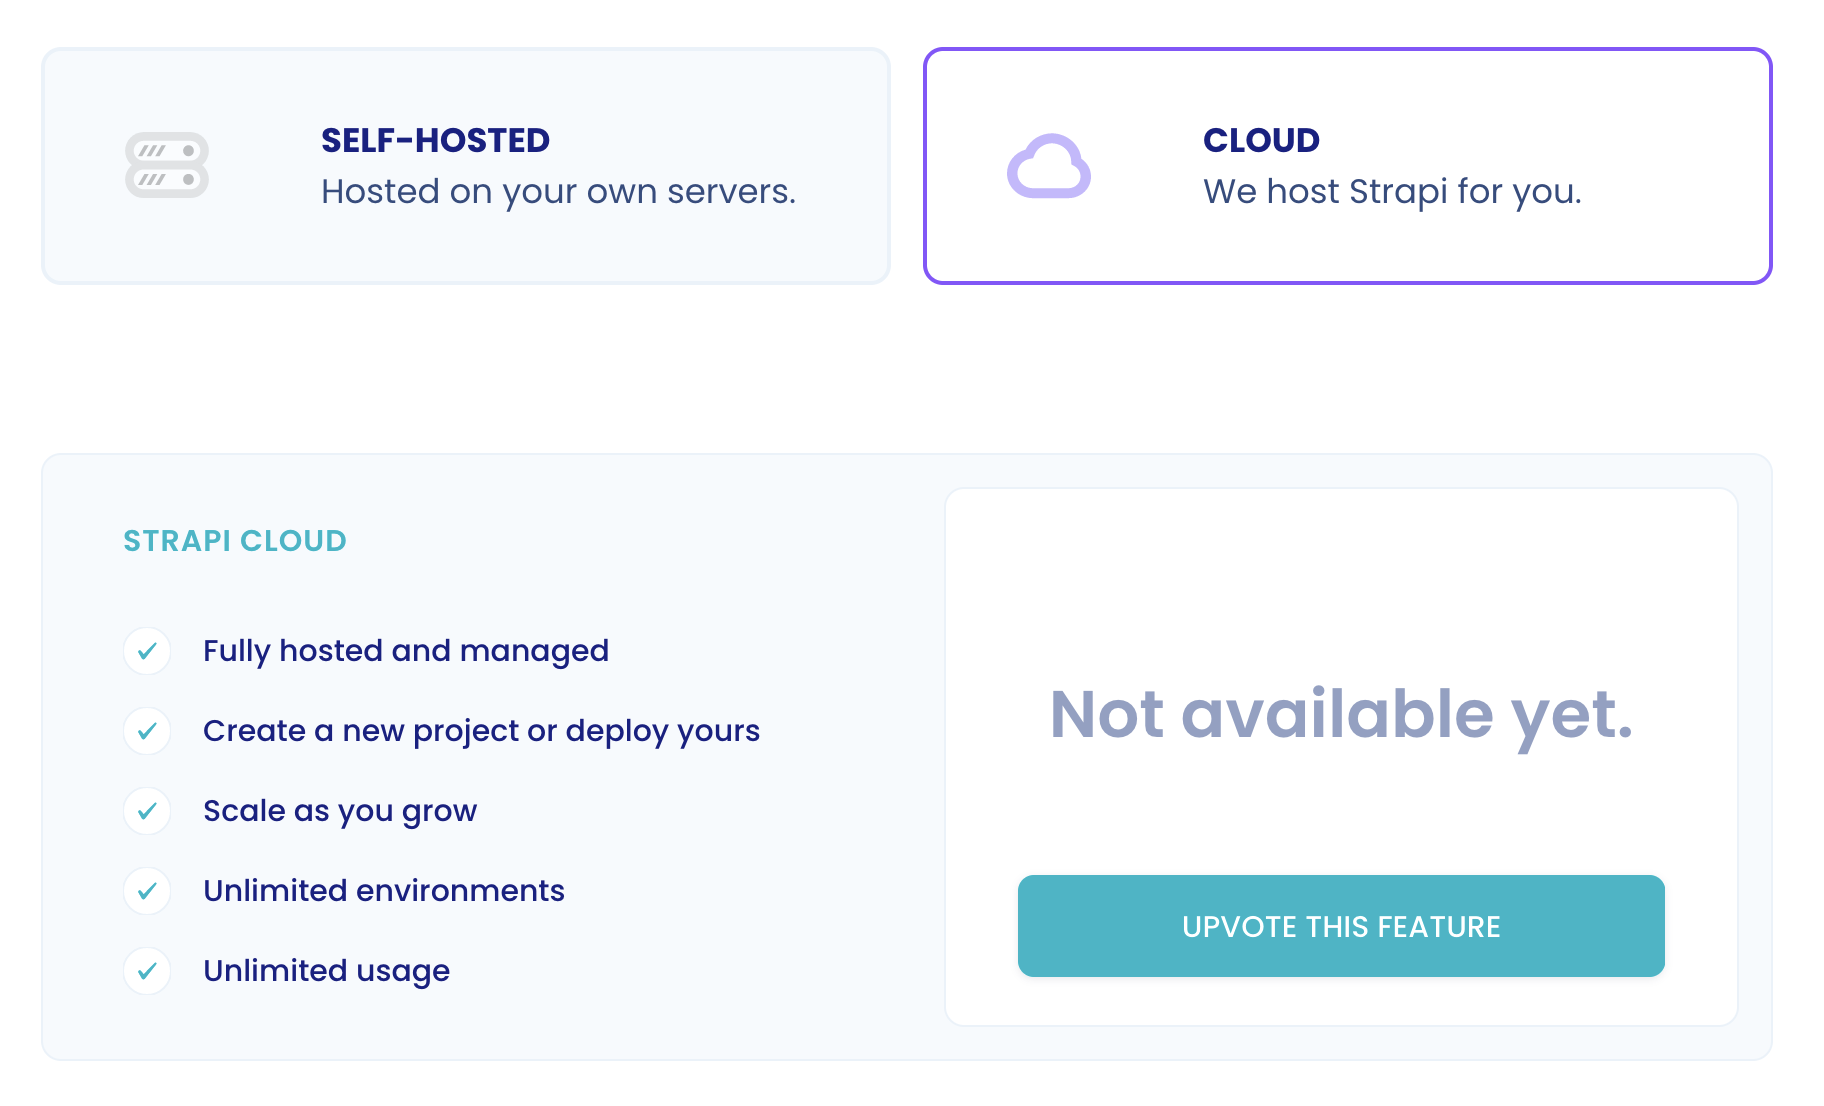 There is some info about the planned Strapi Cloud, but it's not available yet